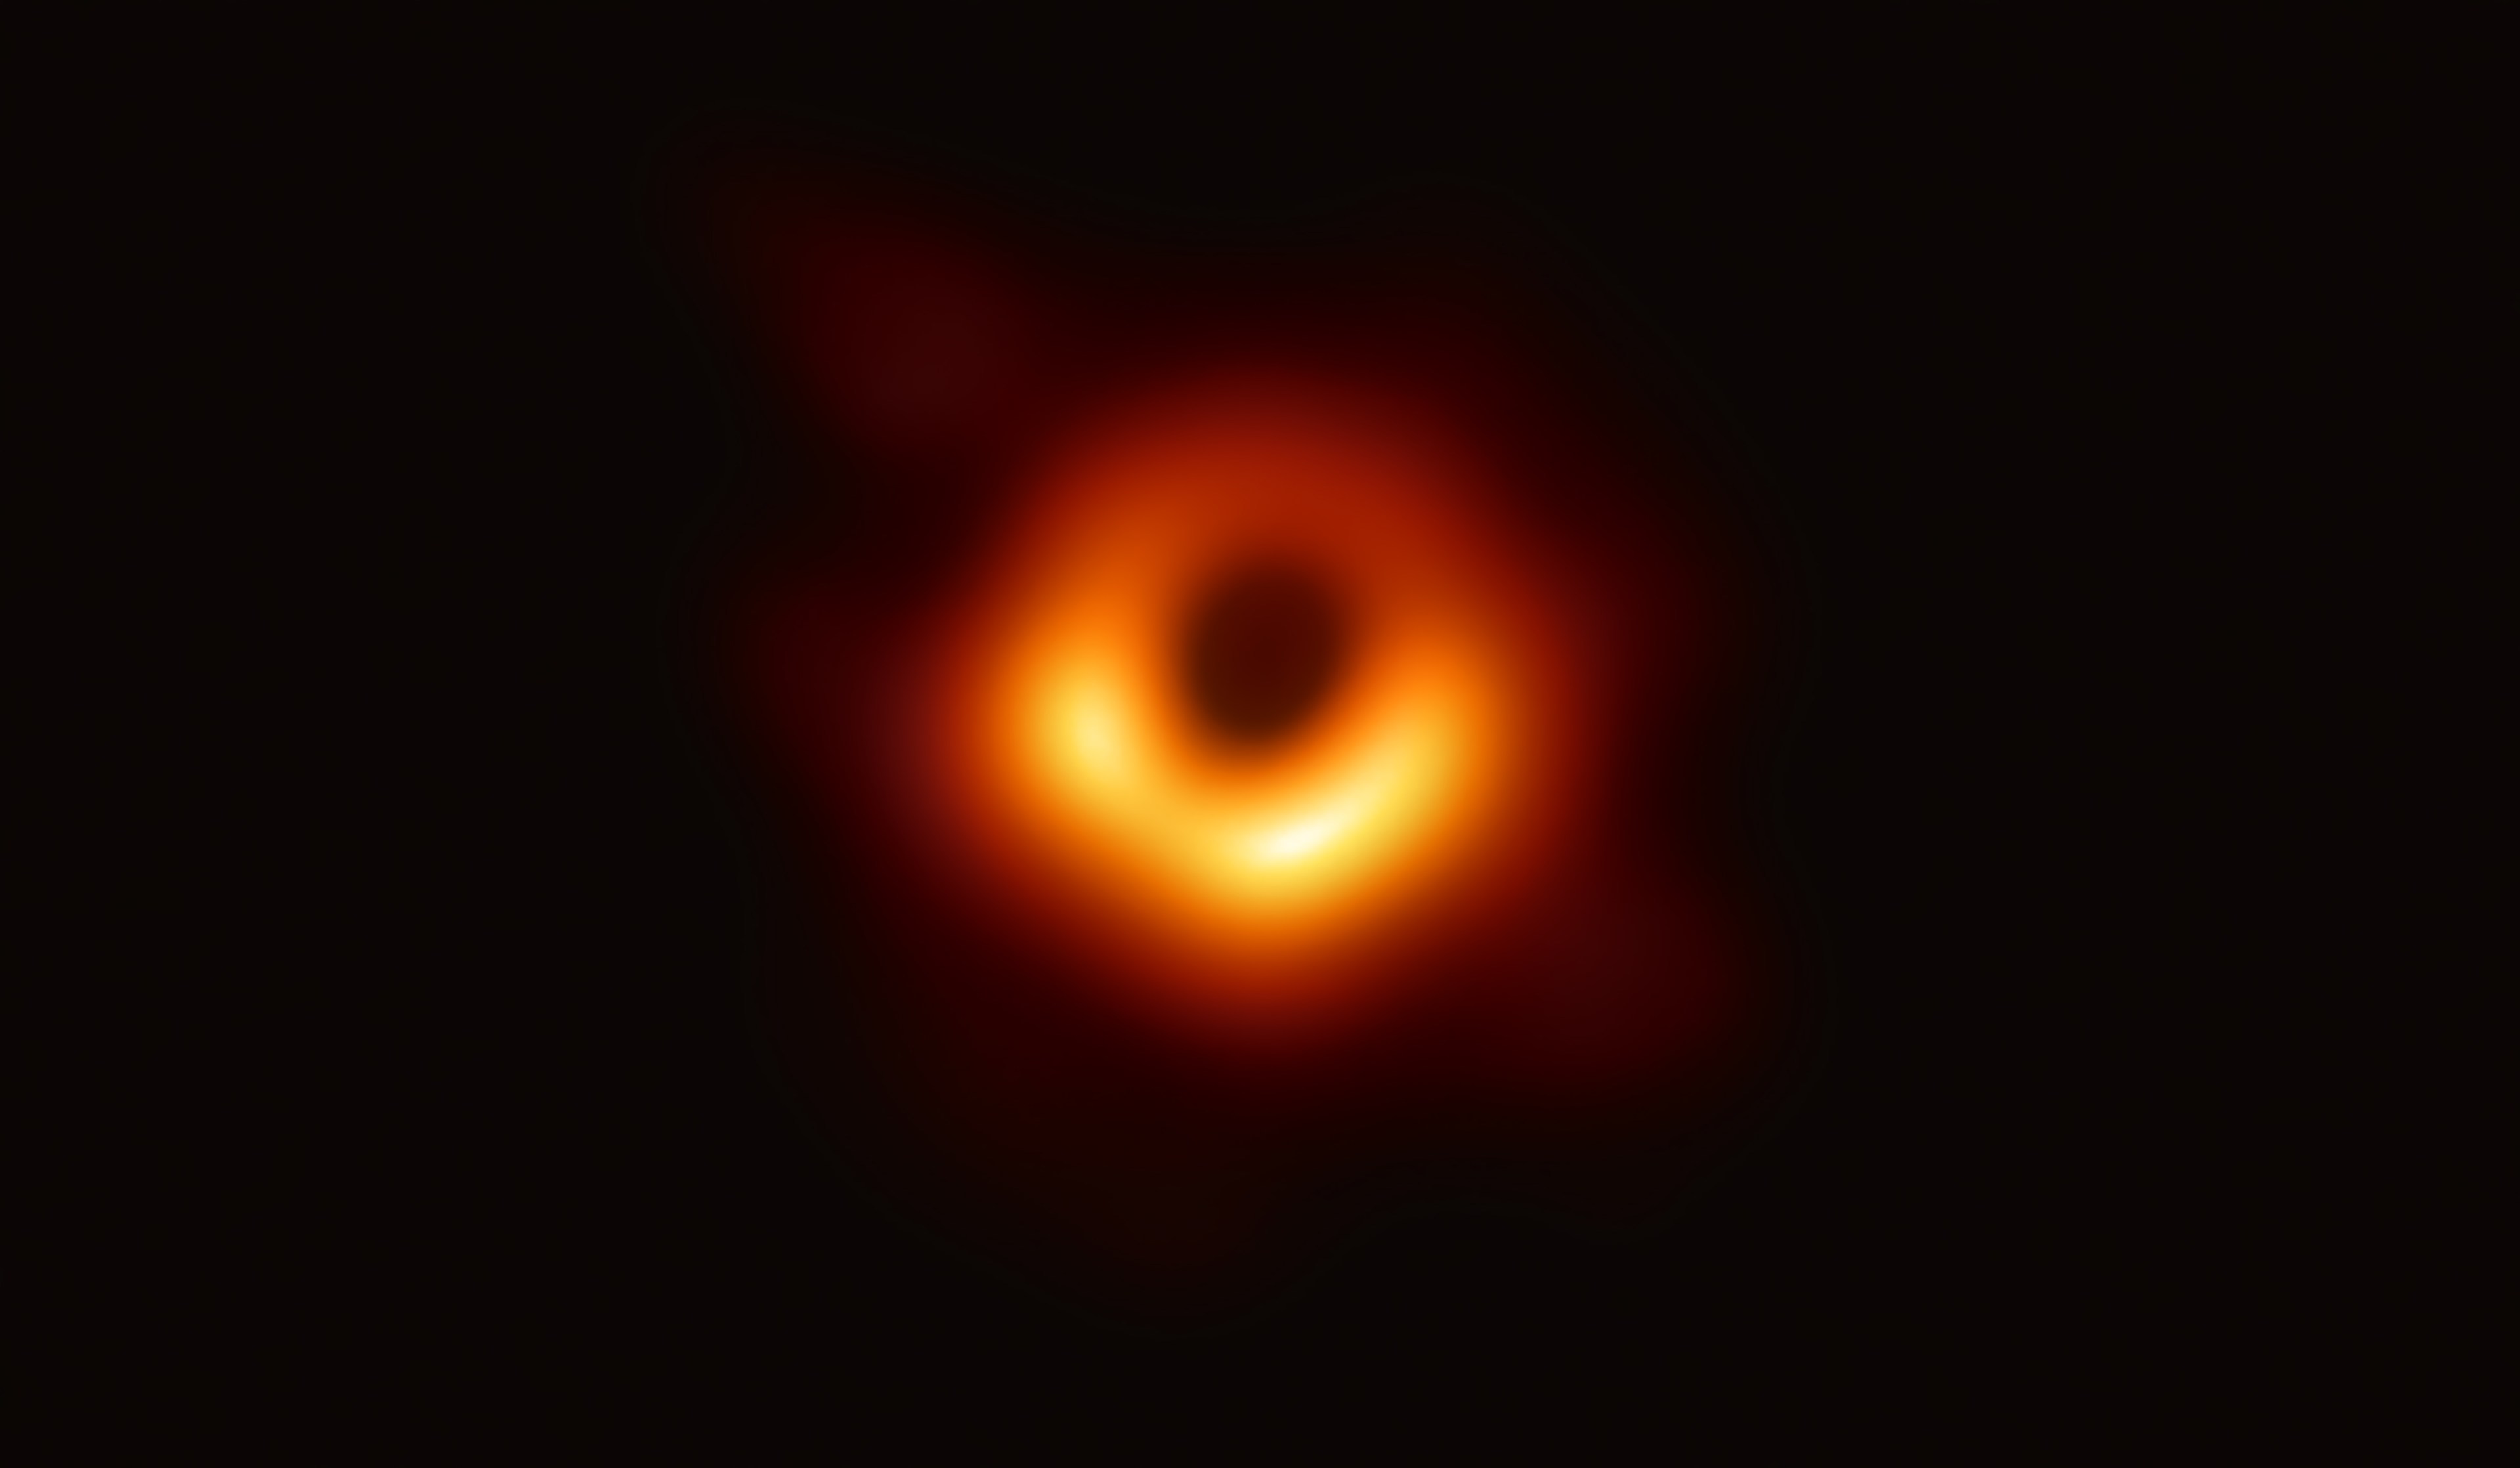 IN SPACE - APRIL 10: In this handout photo provided by the National Science Foundation, the Event Horizon Telescope captures a black hole at the center of galaxy M87, outlined by emission from hot gas swirling around it under the influence of strong gravity near its event horizon, in an image released on April 10, 2019. A network of eight radio observatories on six mountains and four continents, the EHT observed a black hole in Messier 87, a supergiant elliptical galaxy in the constellation Virgo, on and off for 10 days in April of 2017 to make the image. (Photo by National Science Foundation via Getty Images)